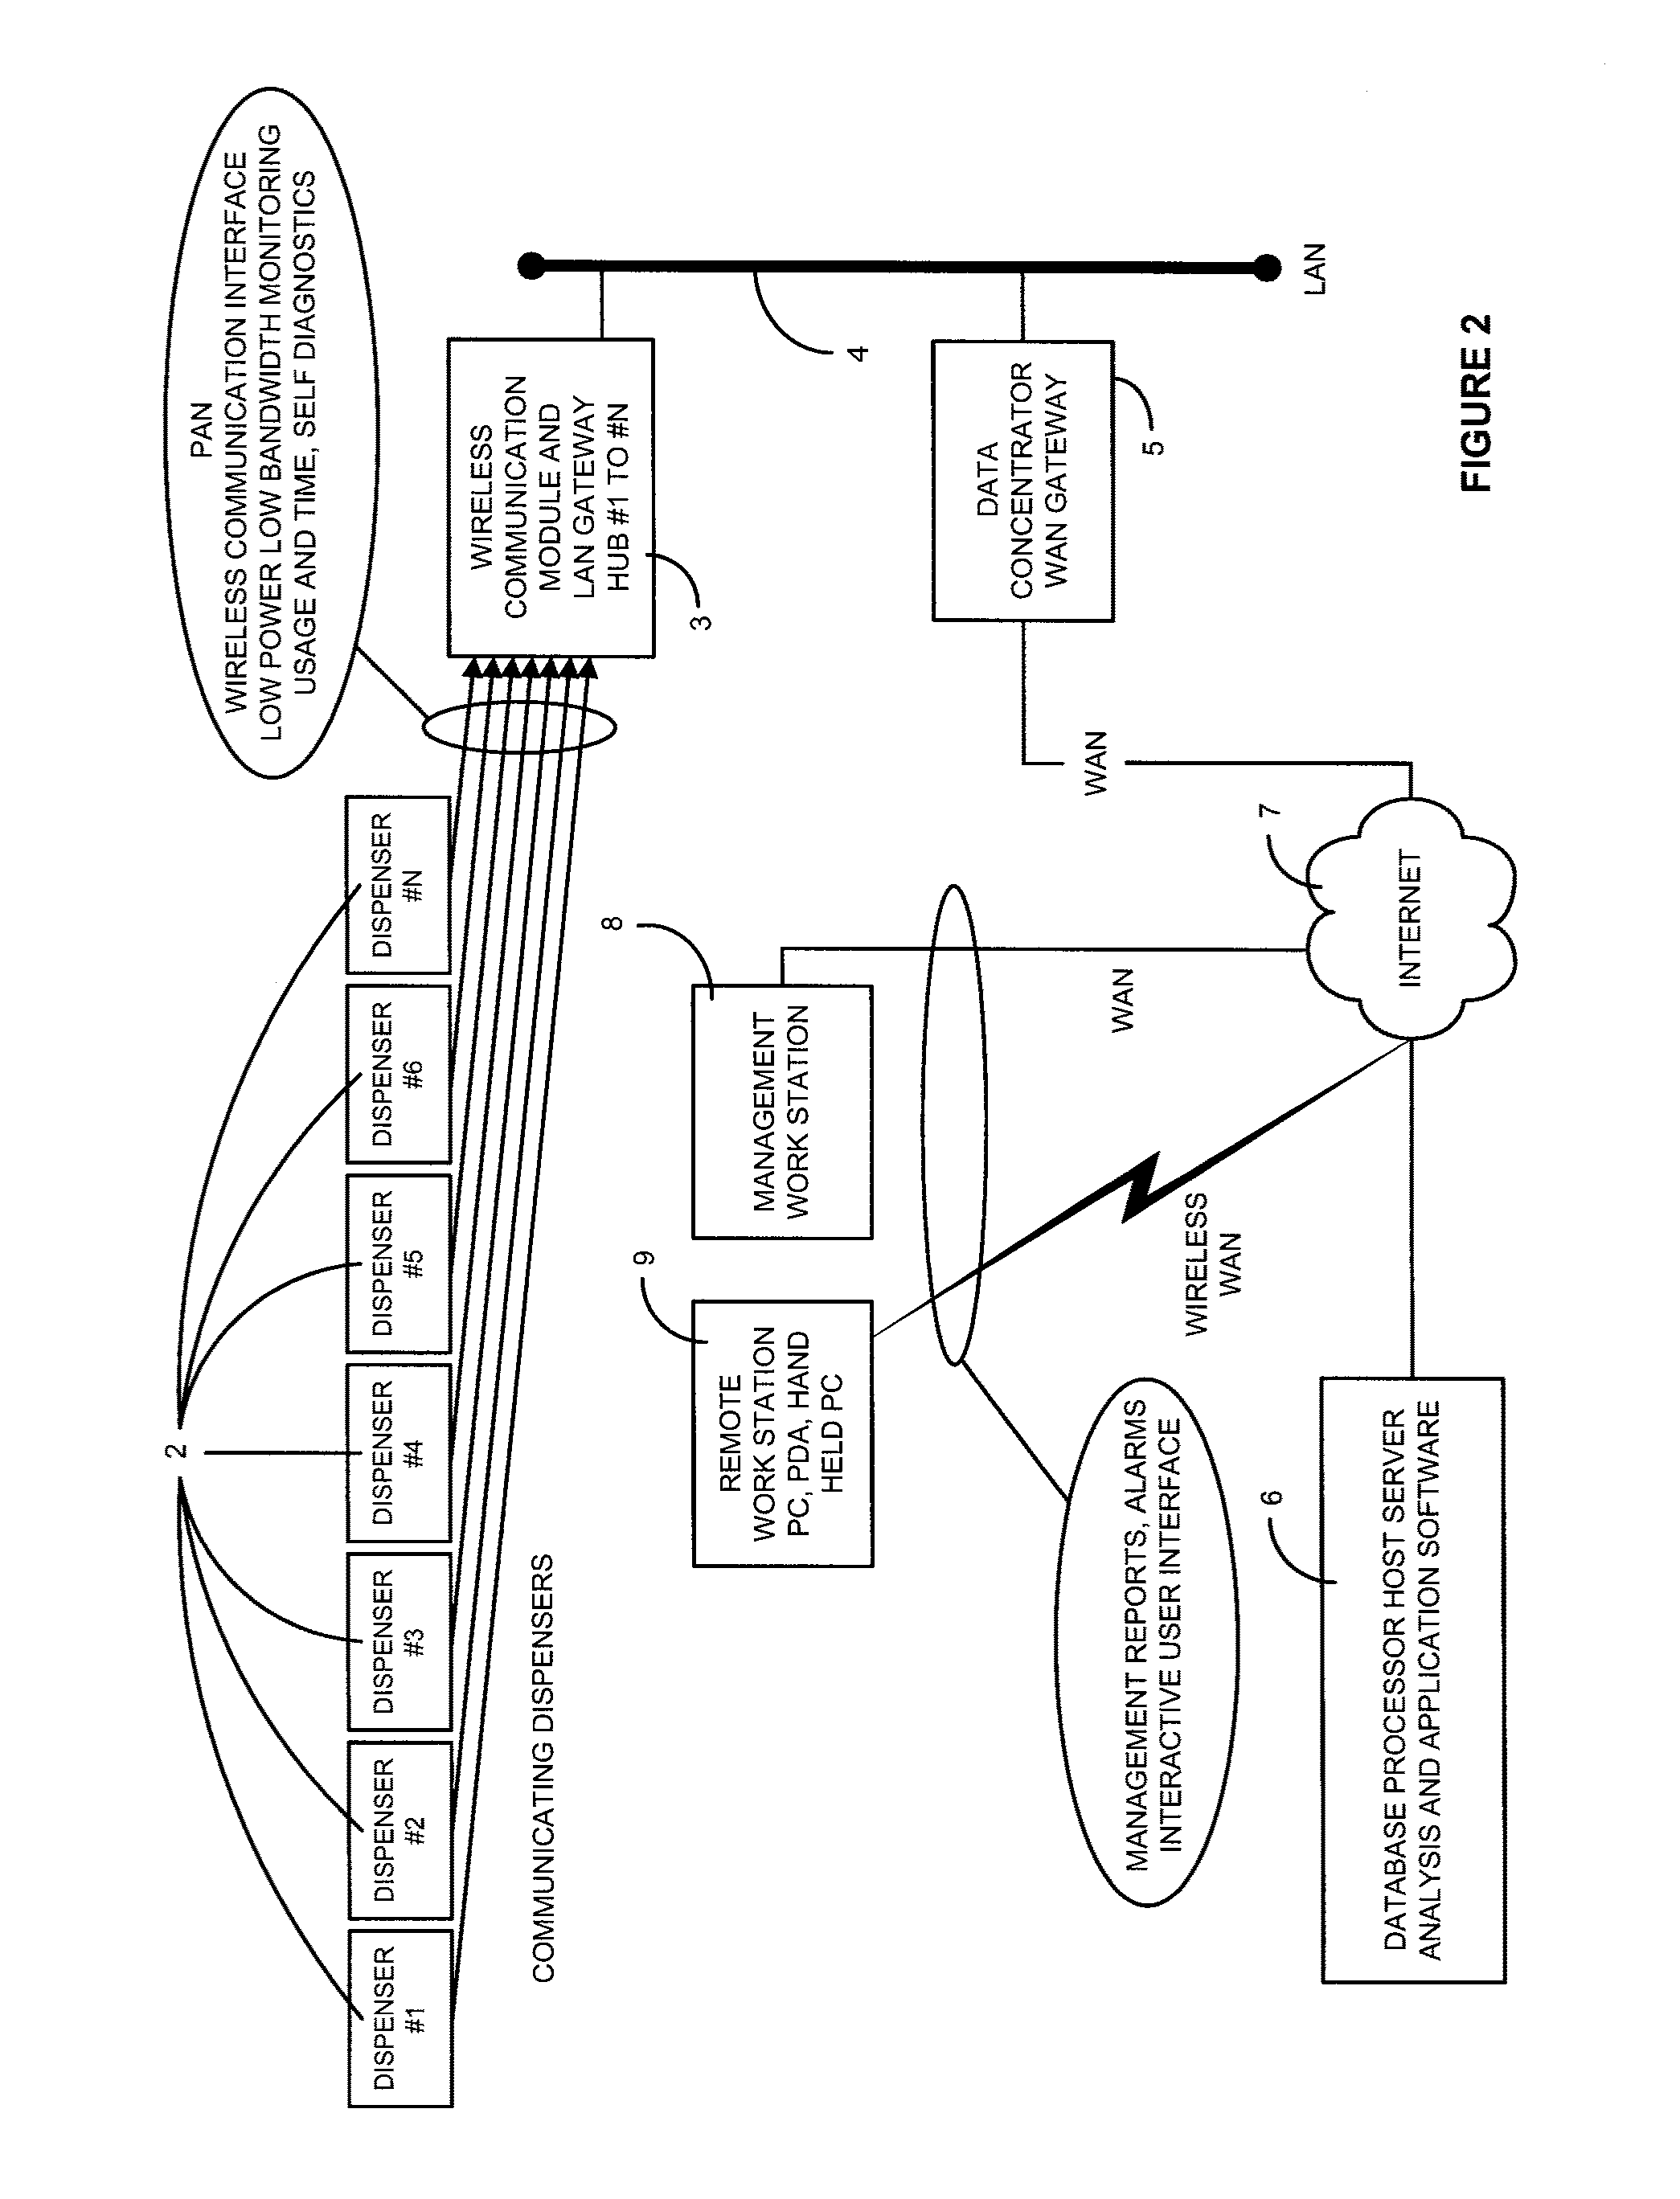 System for monitoring and recording hand hygiene performance